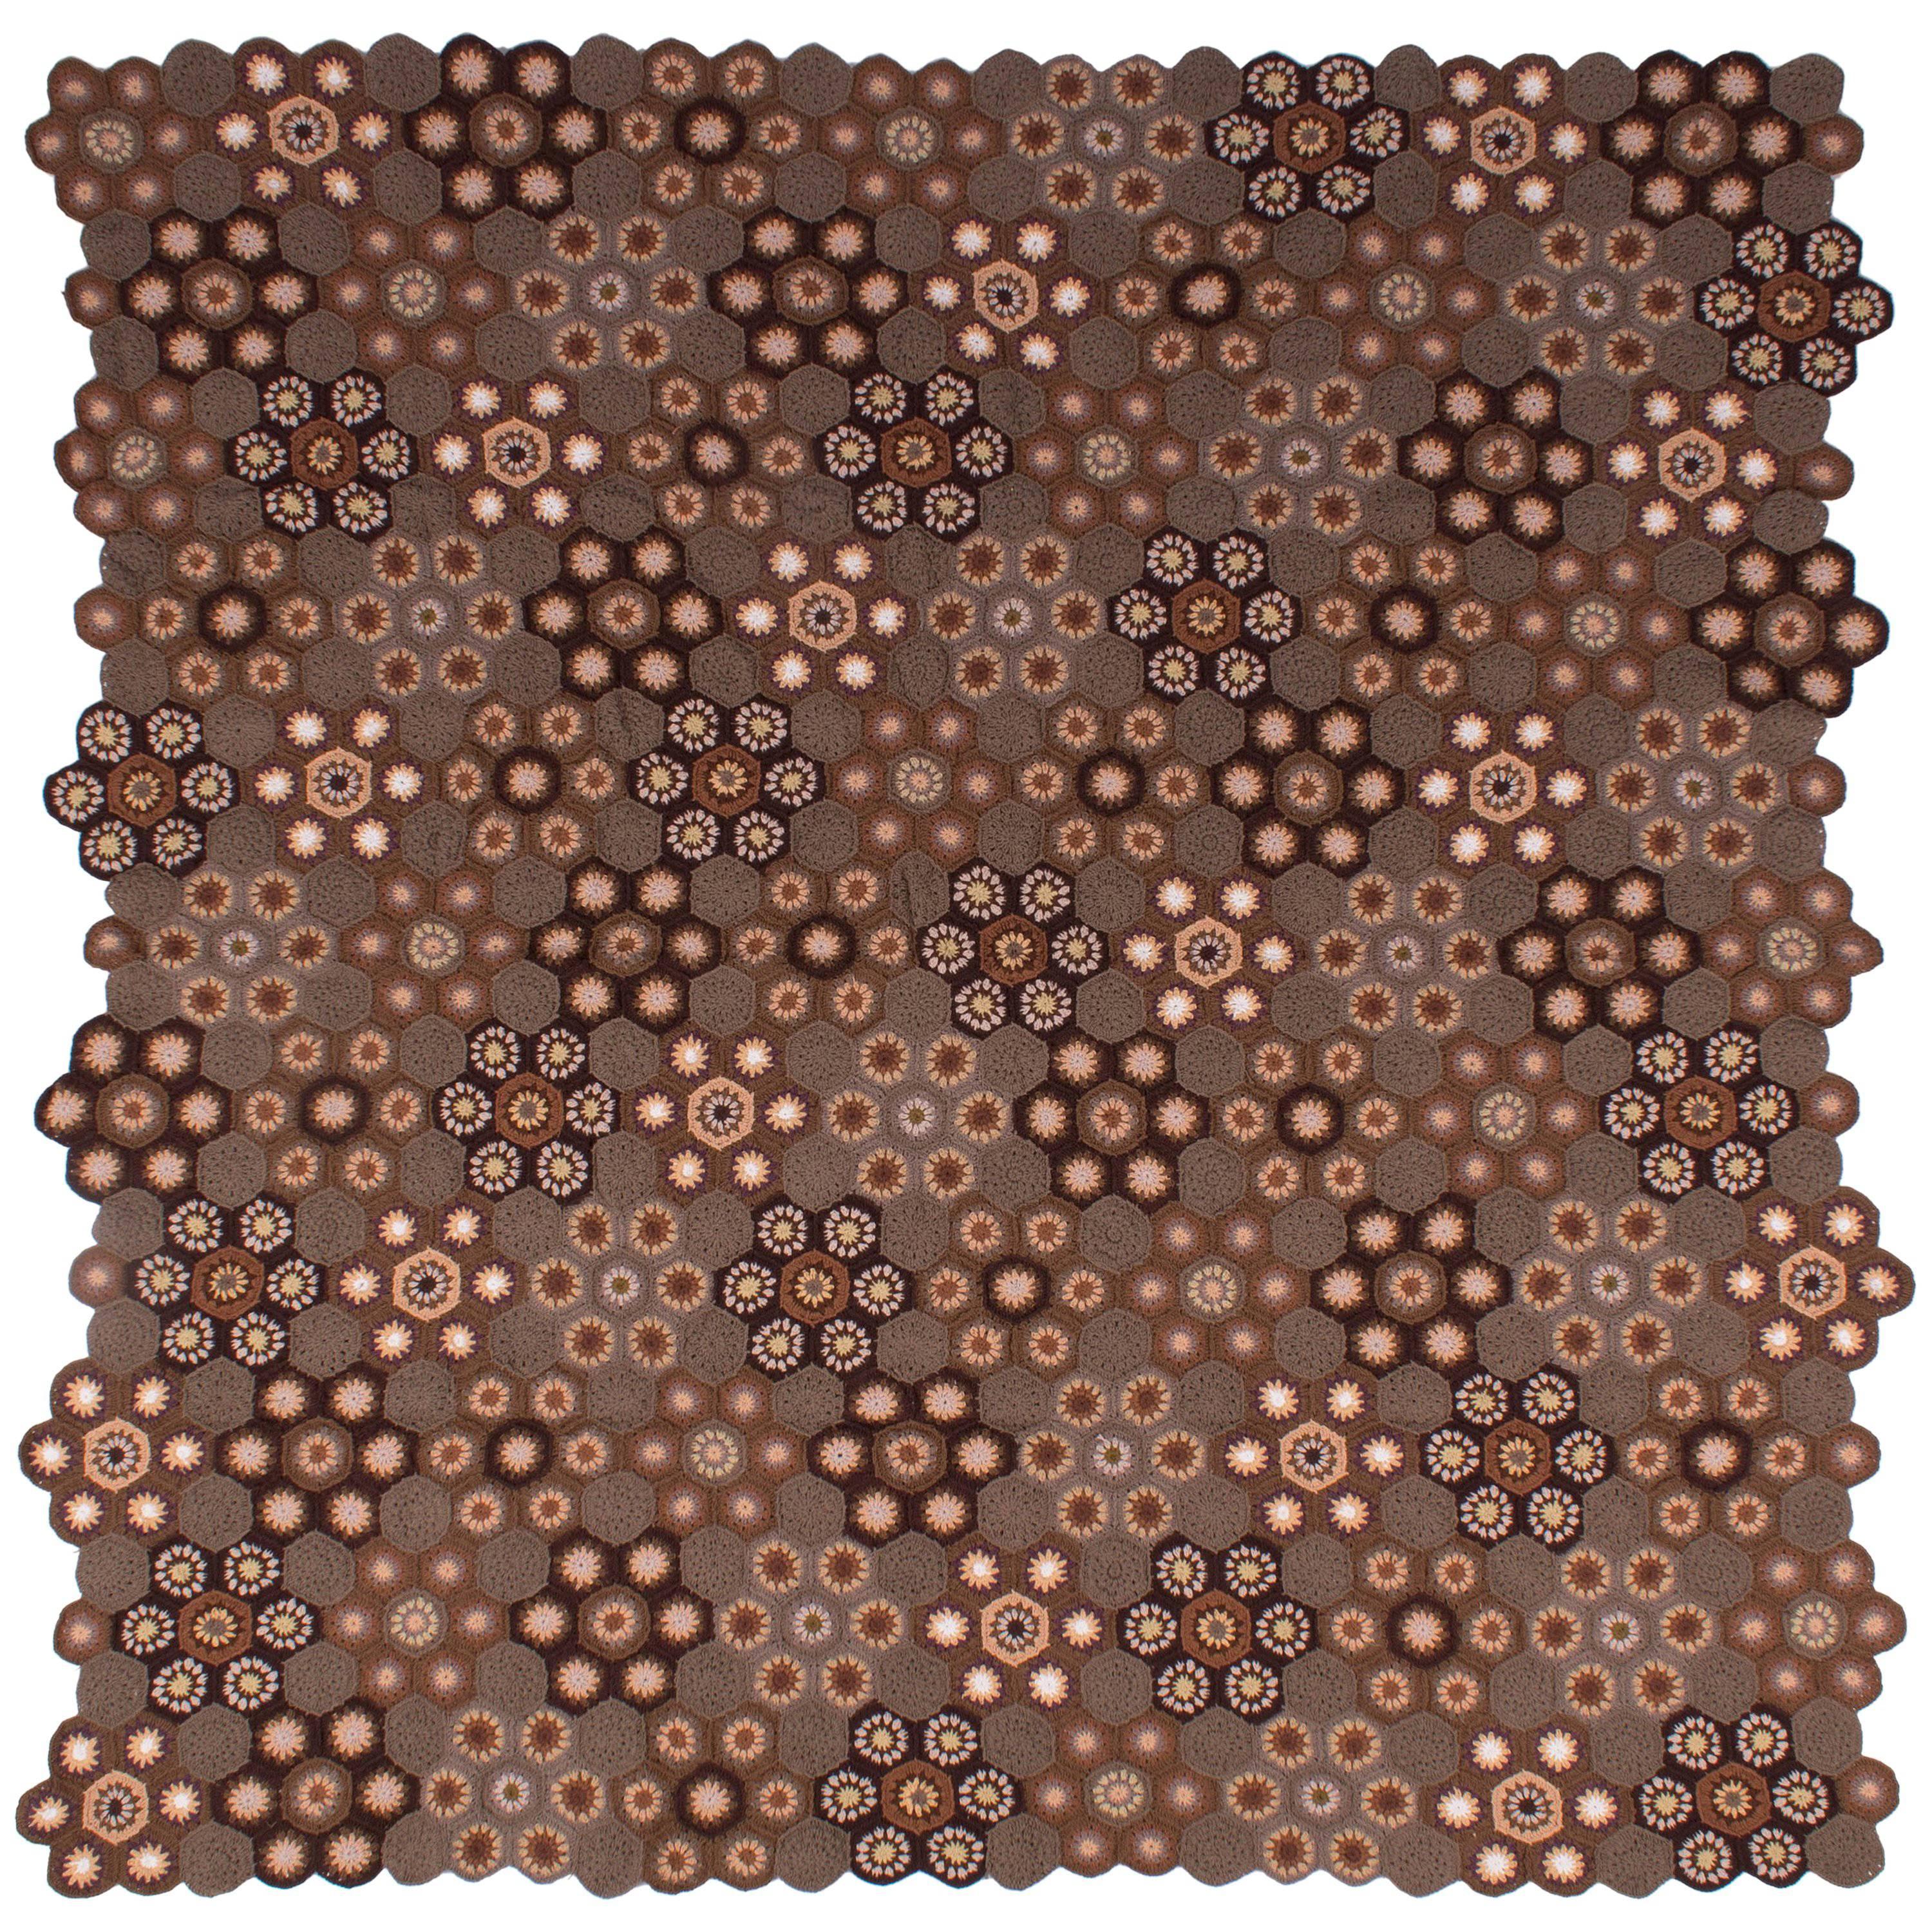 Art Deco Style Crocheted Medallion Blanket Throw 02 Brown and Neutral Tones